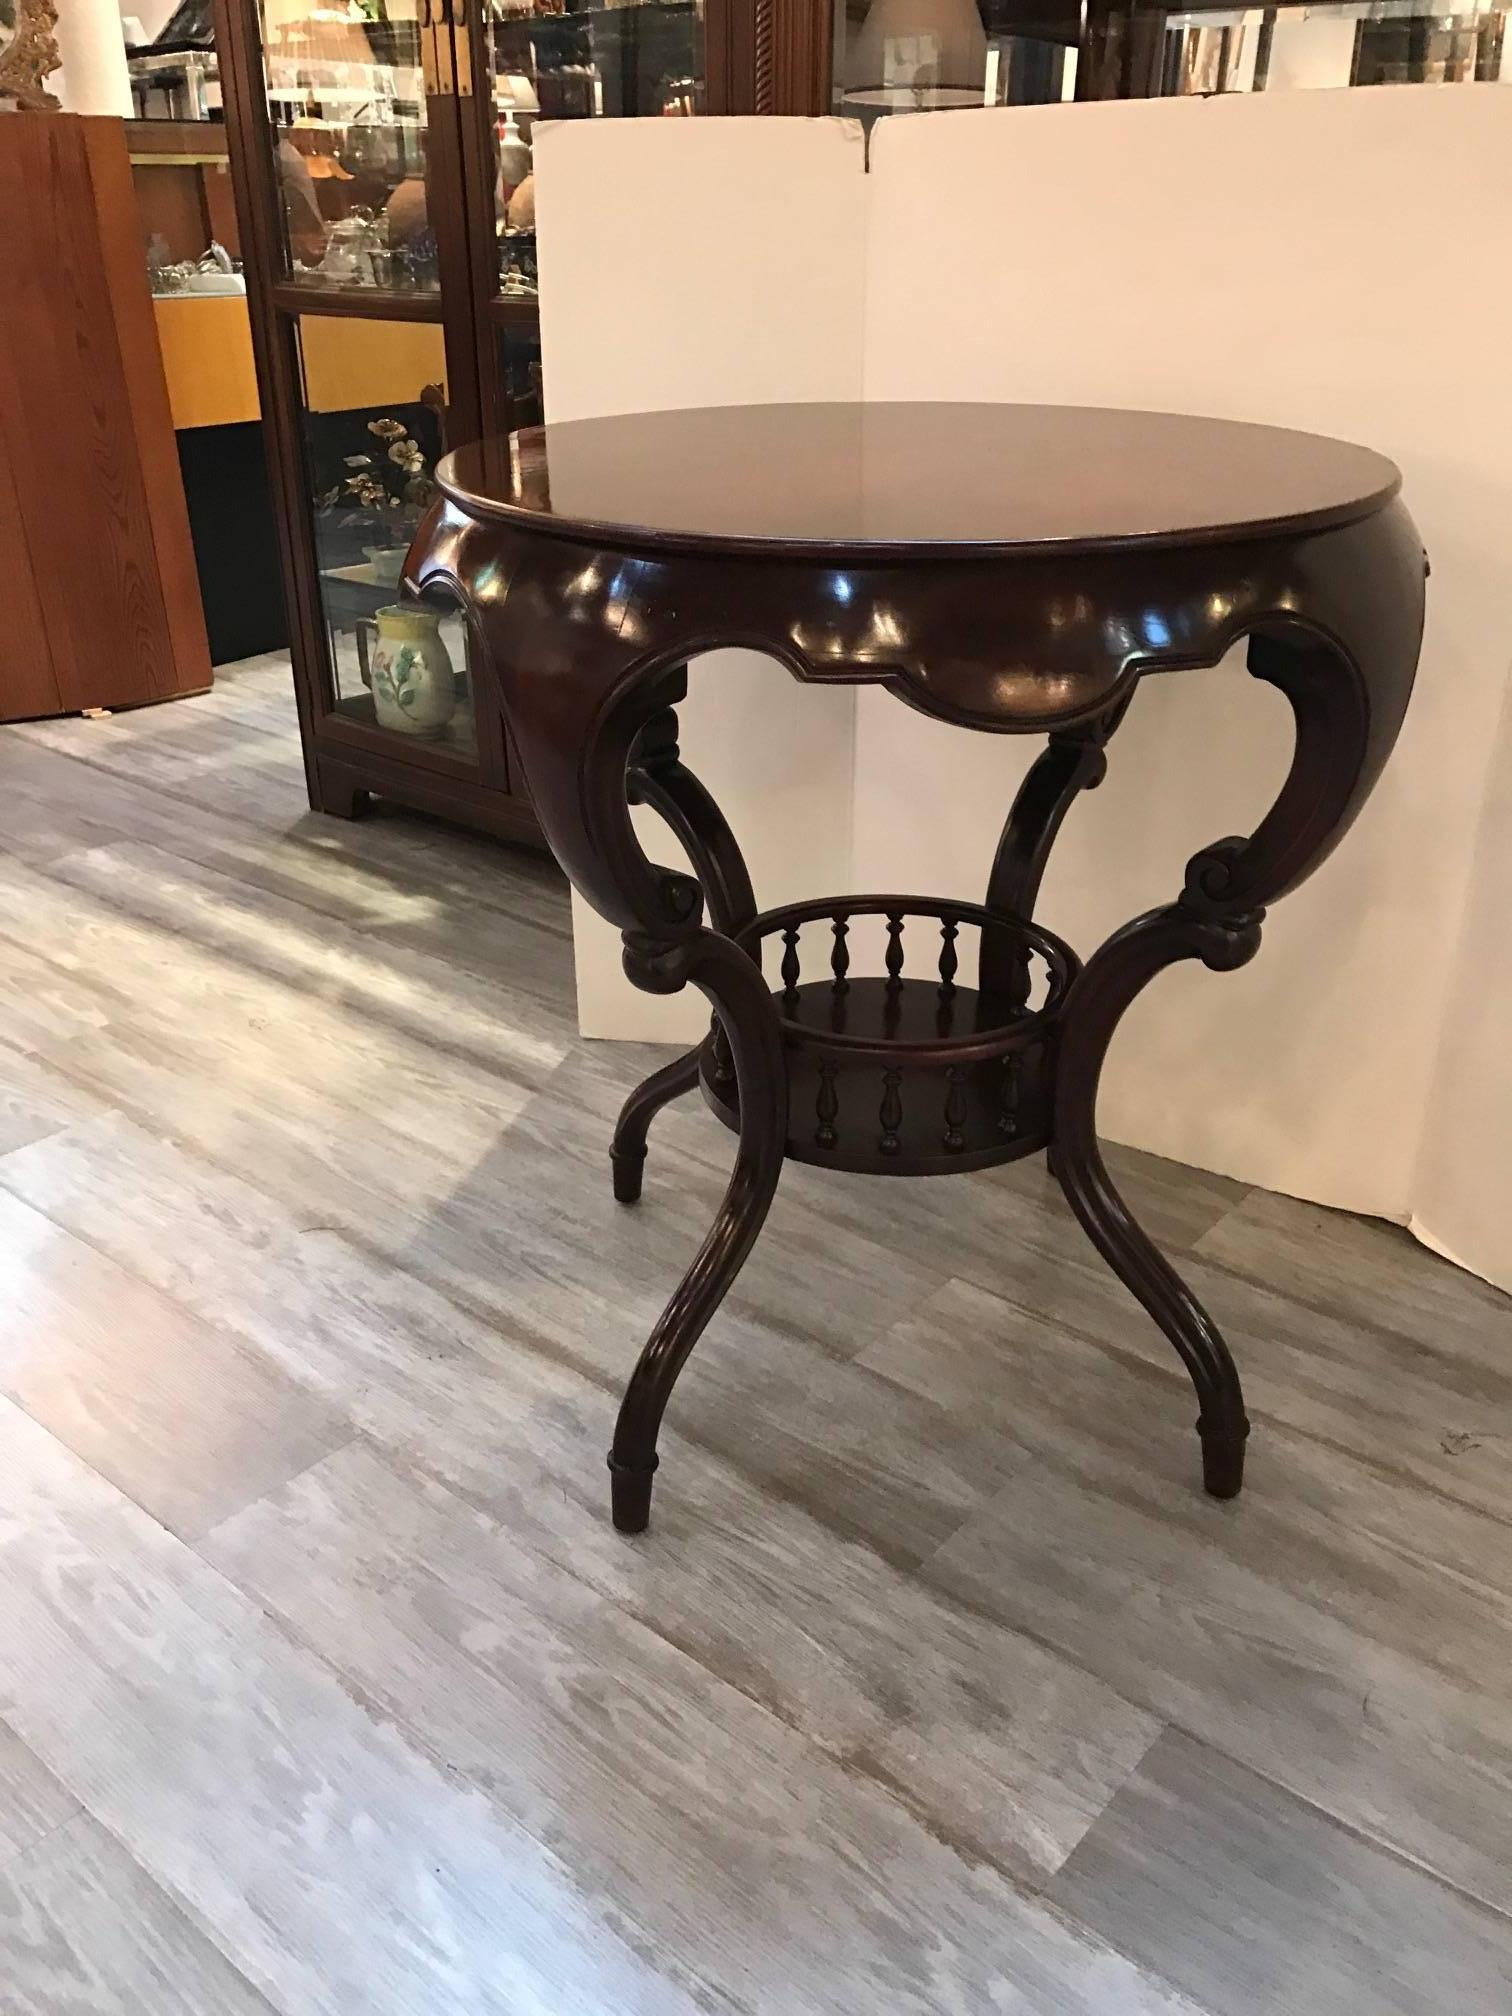 Shapely round side table with bookmatched mahogany grained top. Carved knees and tapered feet support this graceful table. Beautiful deep scalloped apron all around this decorator table has a slight Asian feel which will fit almost any style room.